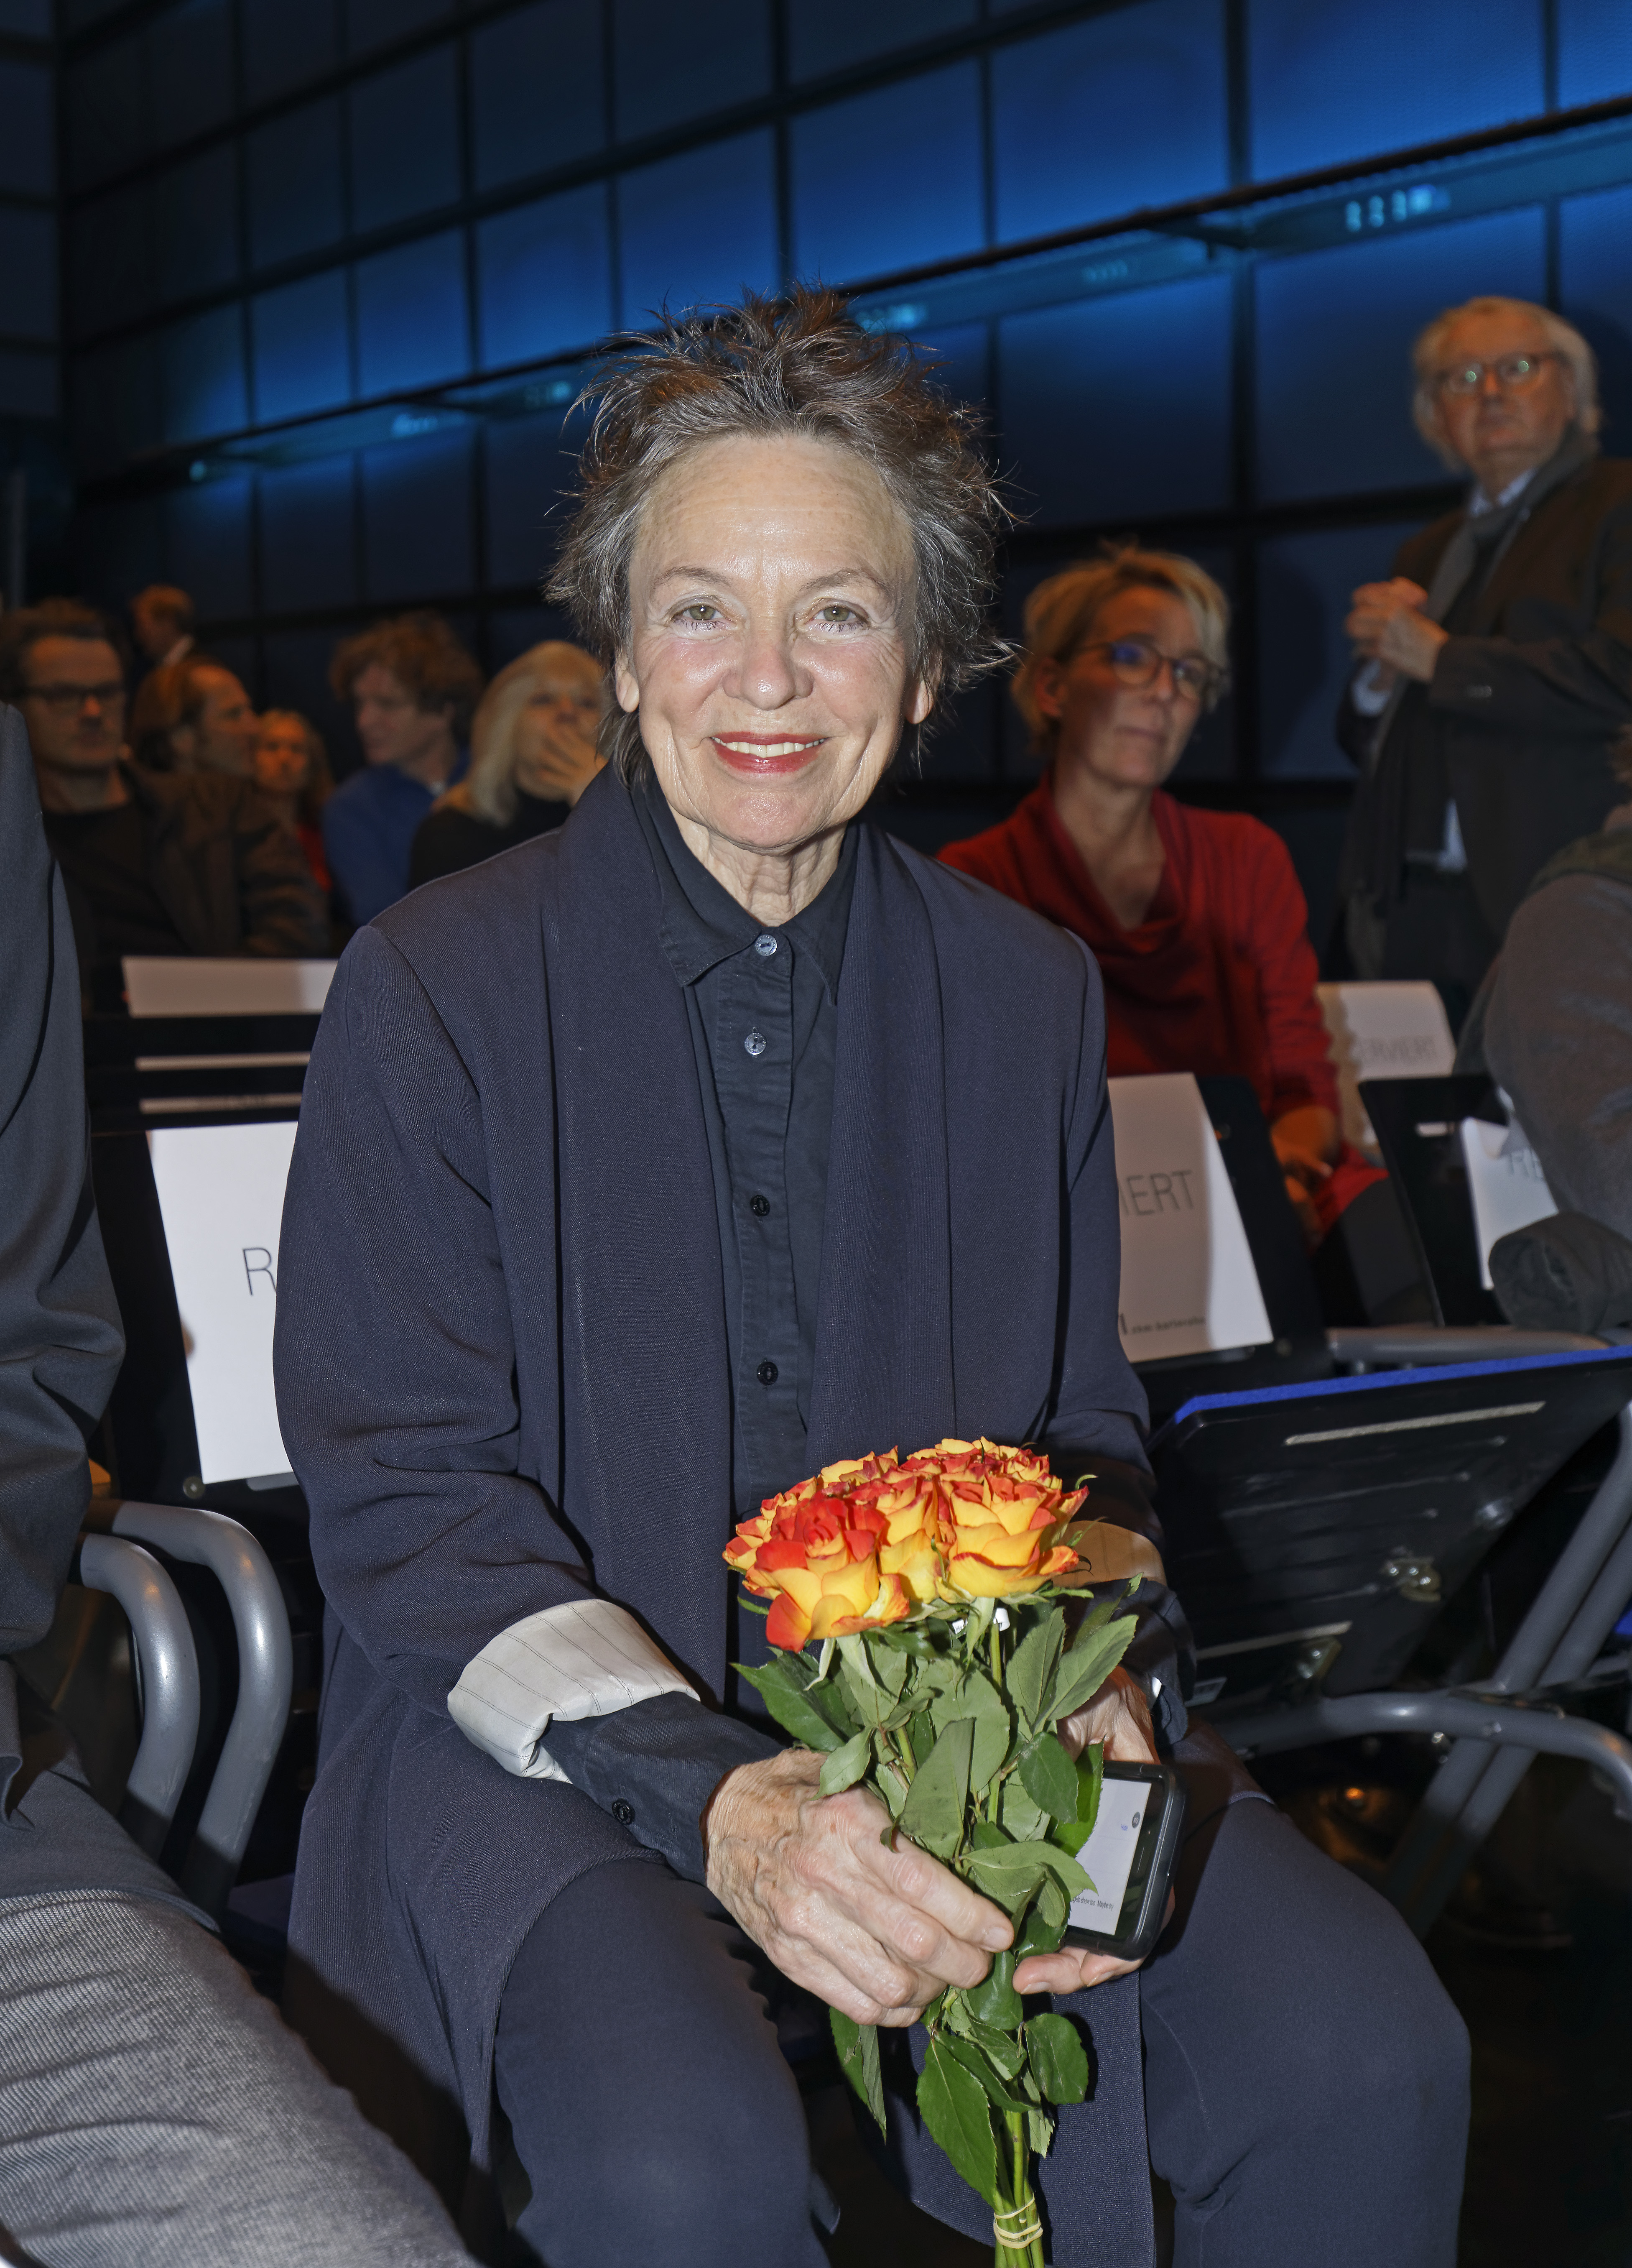 Laurie Anderson at the Award Ceremony of the Giga-Hertz Award Ceremony